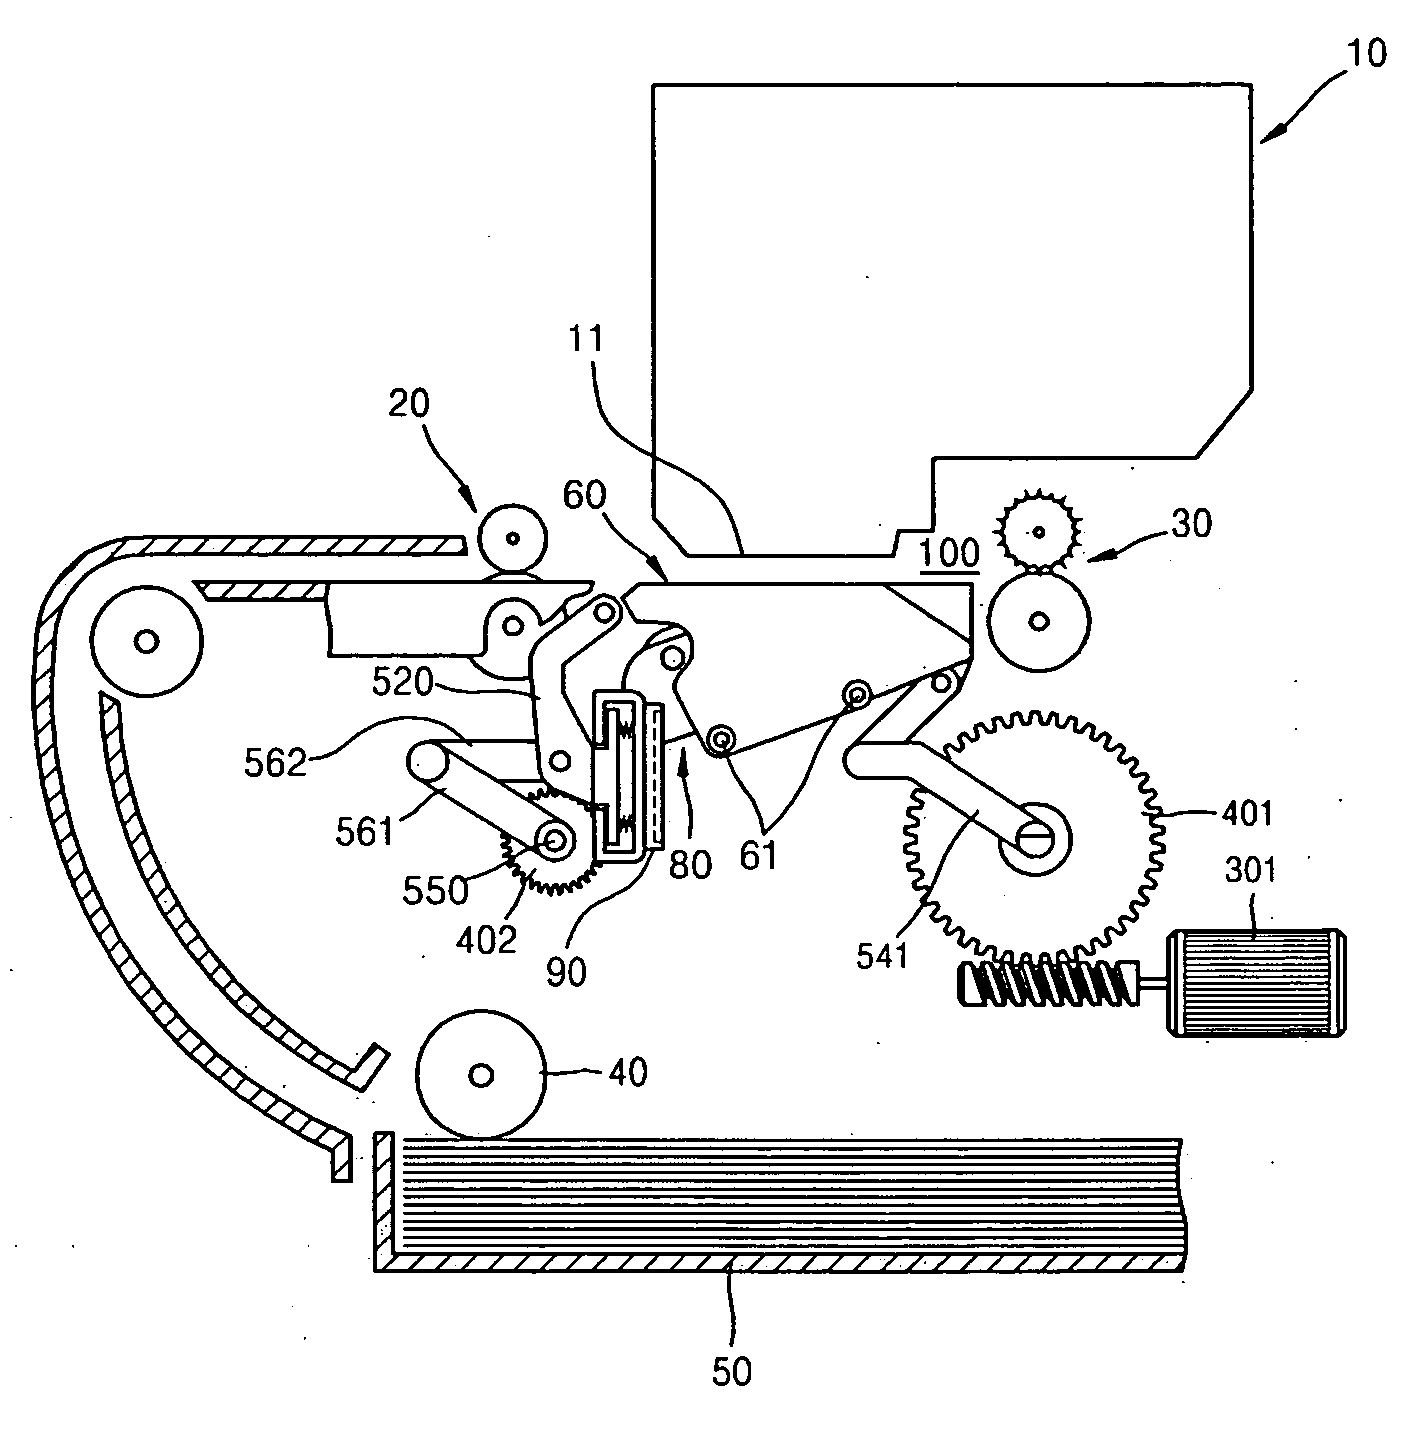 Inkjet image forming apparatus having a wiping unit